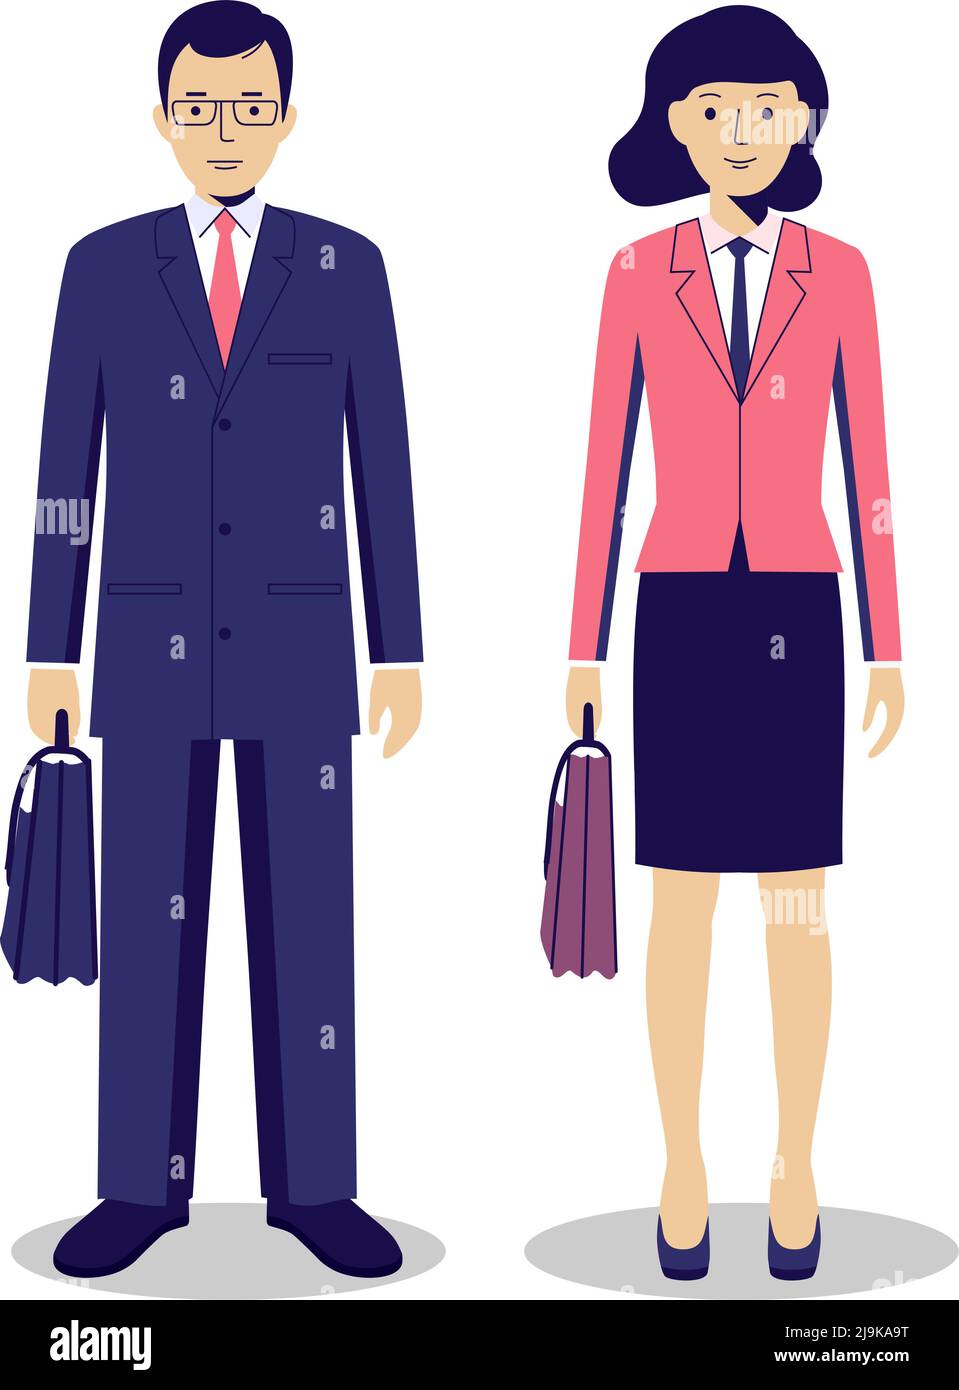 Couple of creative people isolated on white background. Set of business man and woman standing together. Cute and simple in flat style. Stock Vector